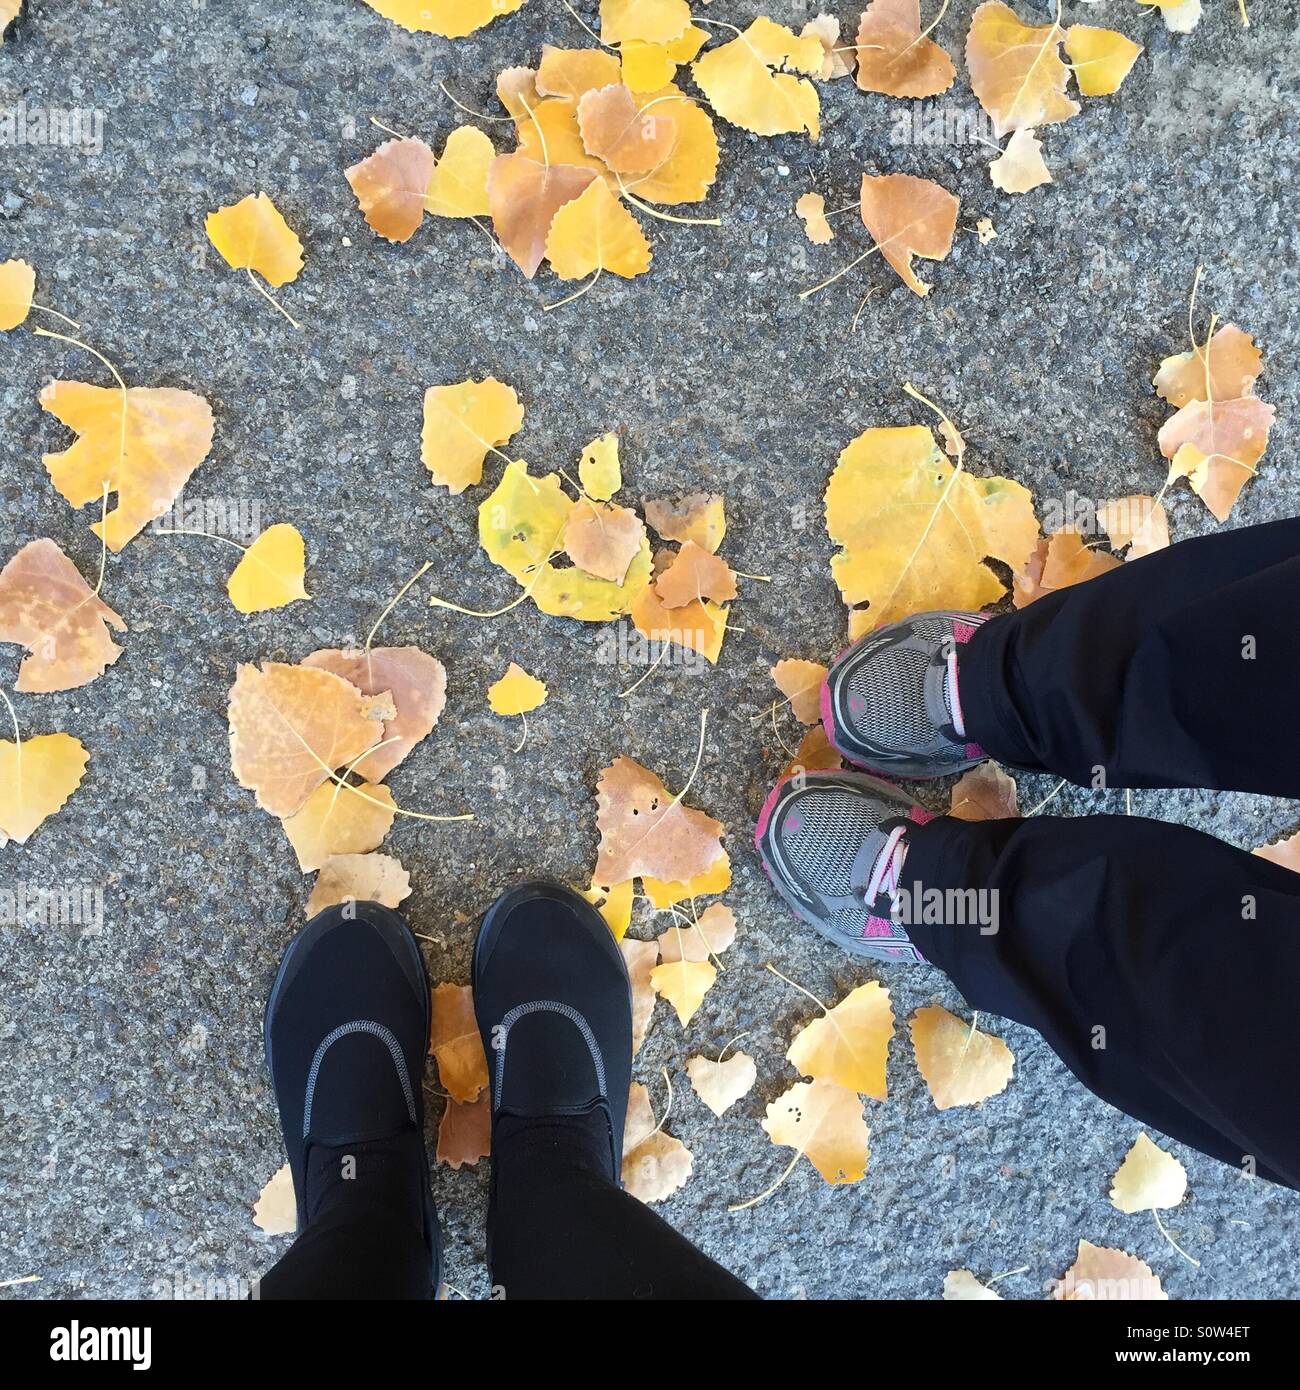 Looking down to two pairs of feet standing on asphalt covered with yellow leaves. Stock Photo